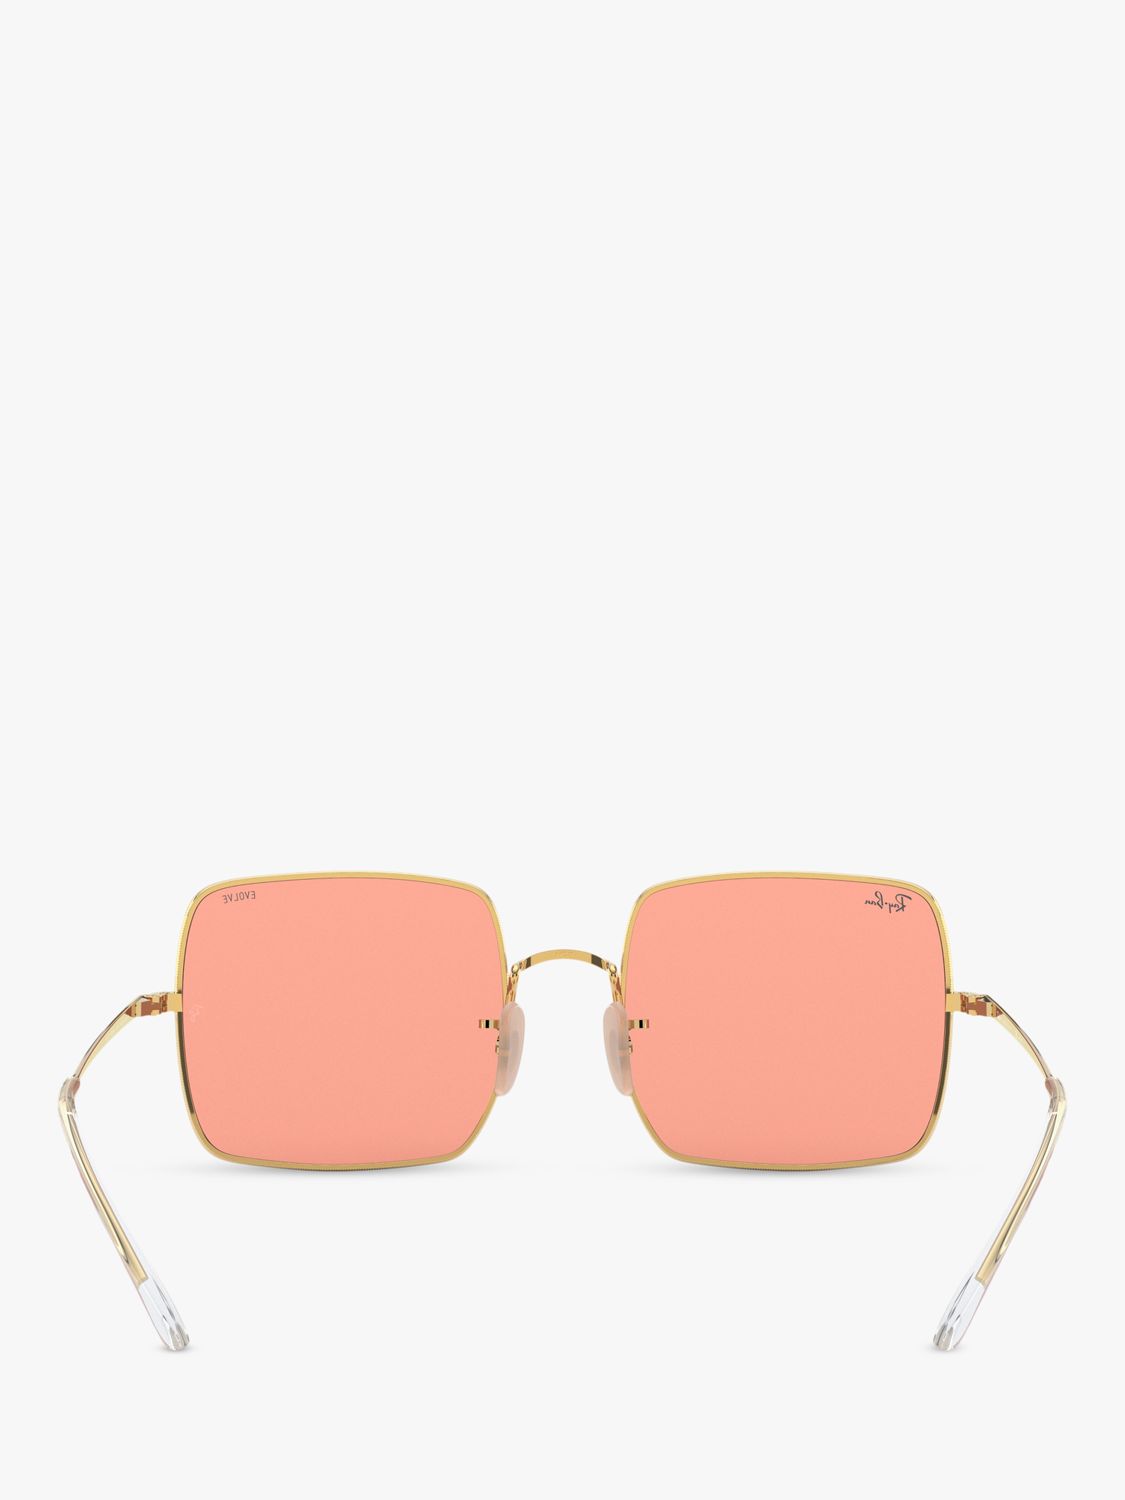 Buy Ray-Ban RB1971 Unisex Square Sunglasses, Gold/Pink Online at johnlewis.com